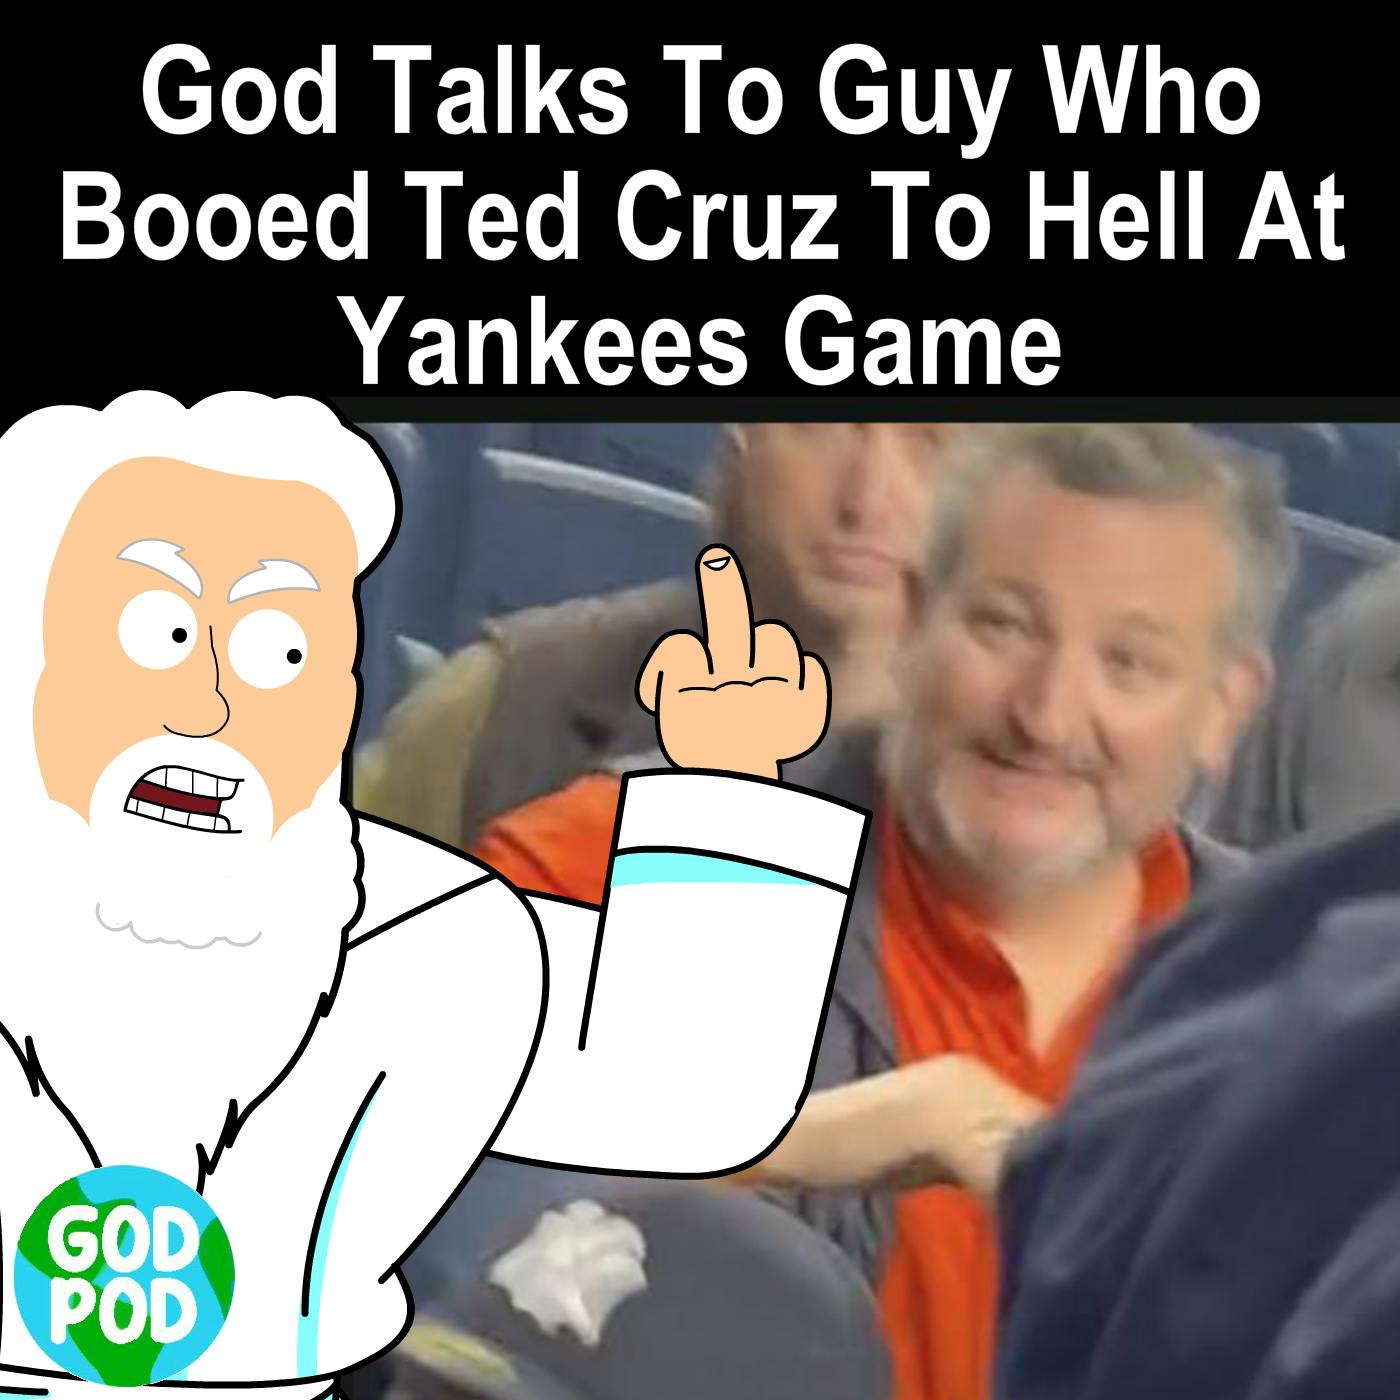 God Talks To Guy Who Booed Ted Cruz To Hell At Yankees Game